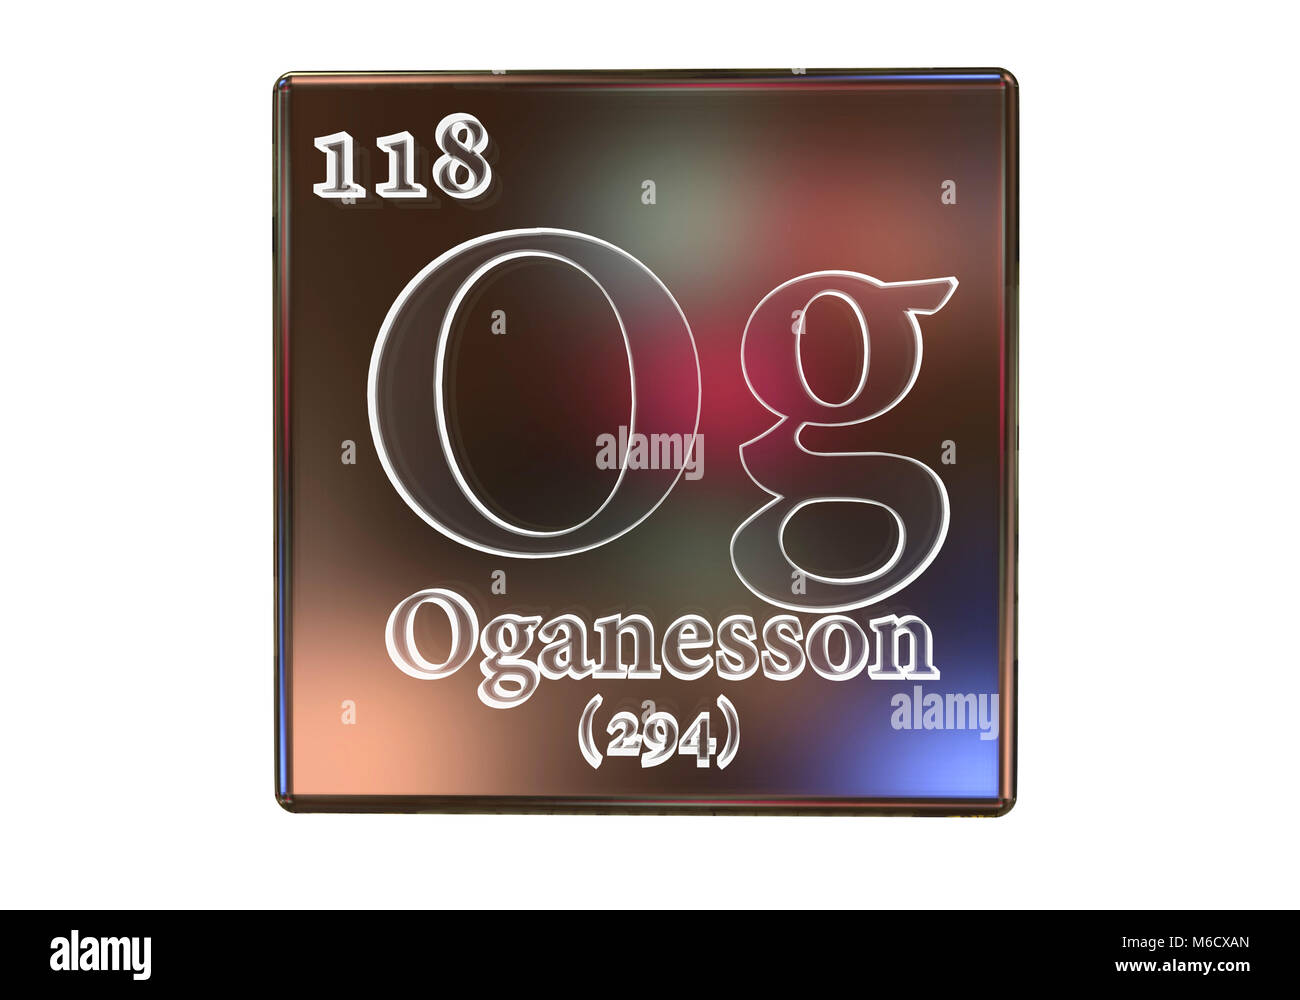 Computer illustration of one of the most recently added elements to the periodic table (as of early 2018): Element 118 Oganesson (Og). Stock Photo